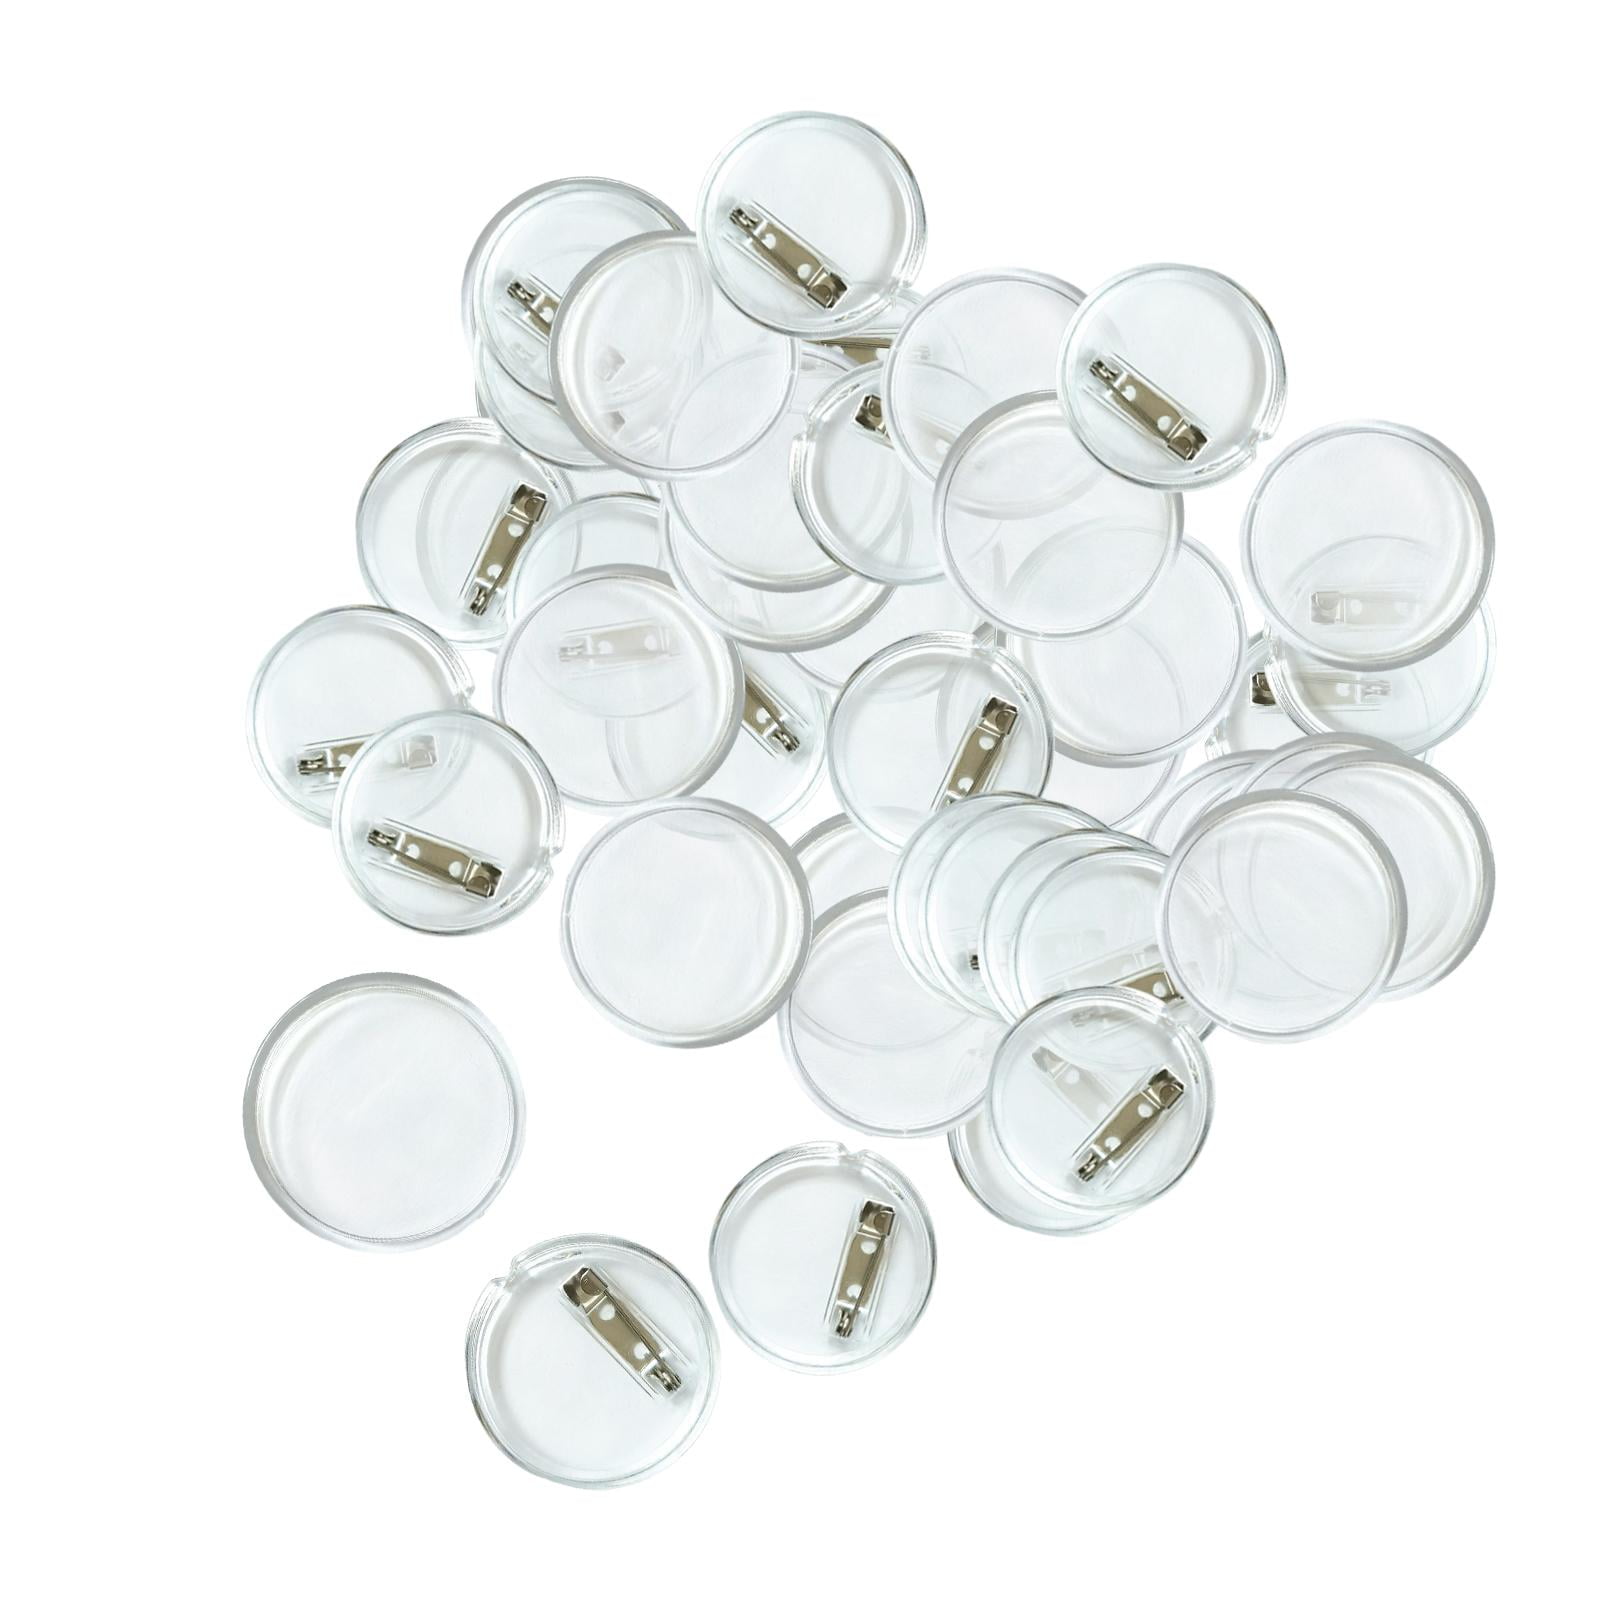 Mardatt 50pcs 4 Sizes Clear Button Badges Set with Pin, 25/38/45/60mm Acrylic Round Badge Pins Blank Button Picture Custom Design for DIY Making